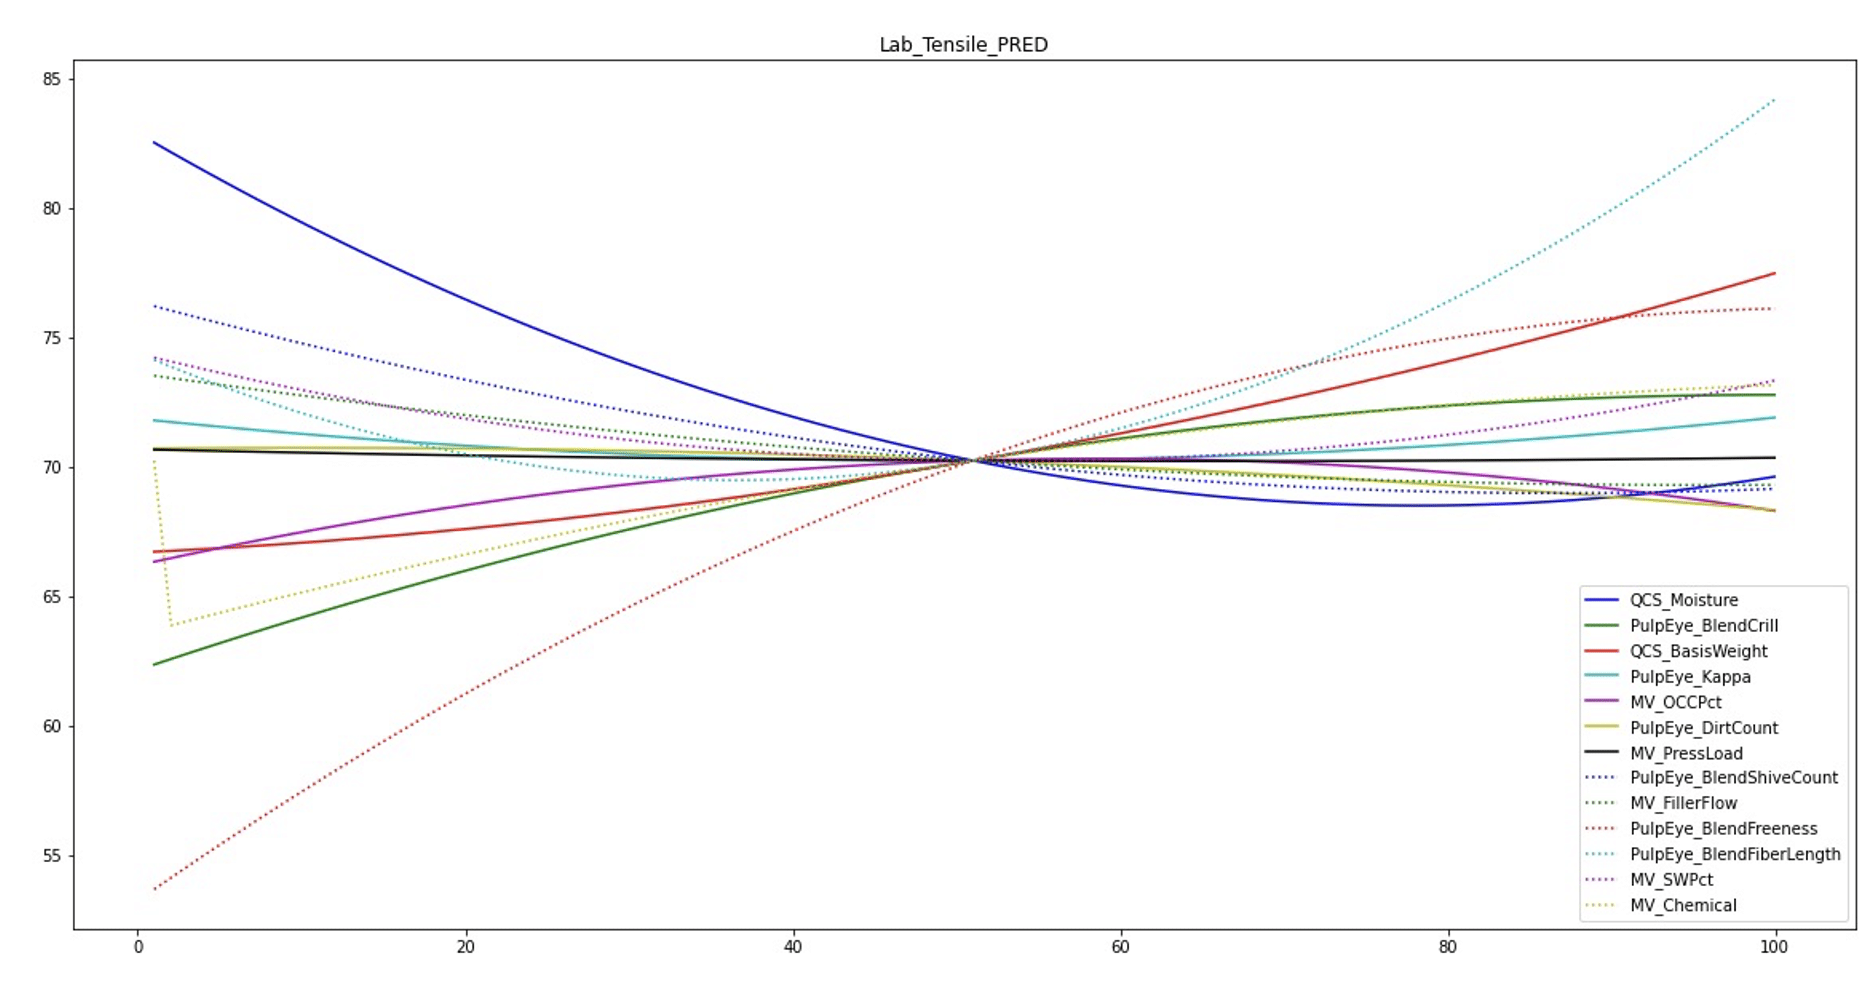 lab tensile prediction from Pulmac